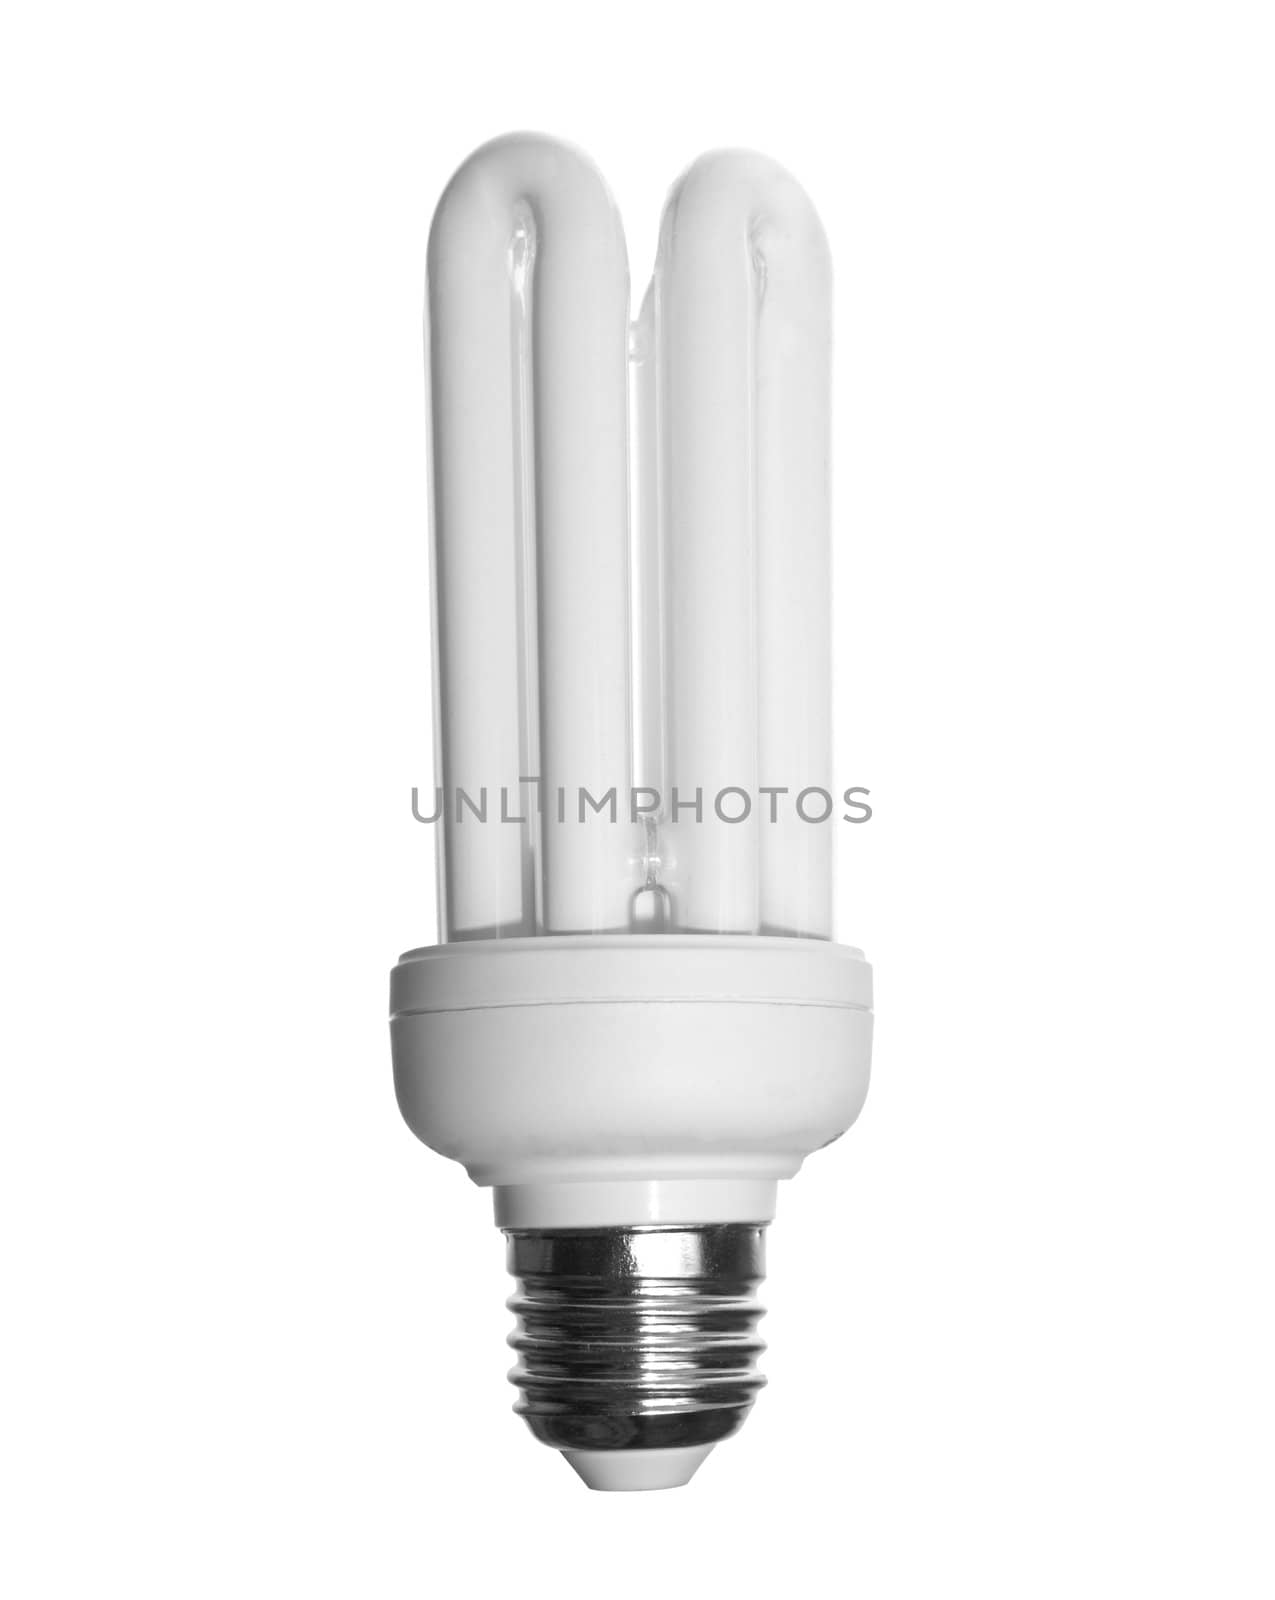 Energy saving compact fluorescent light bulb isolated by ozaiachin